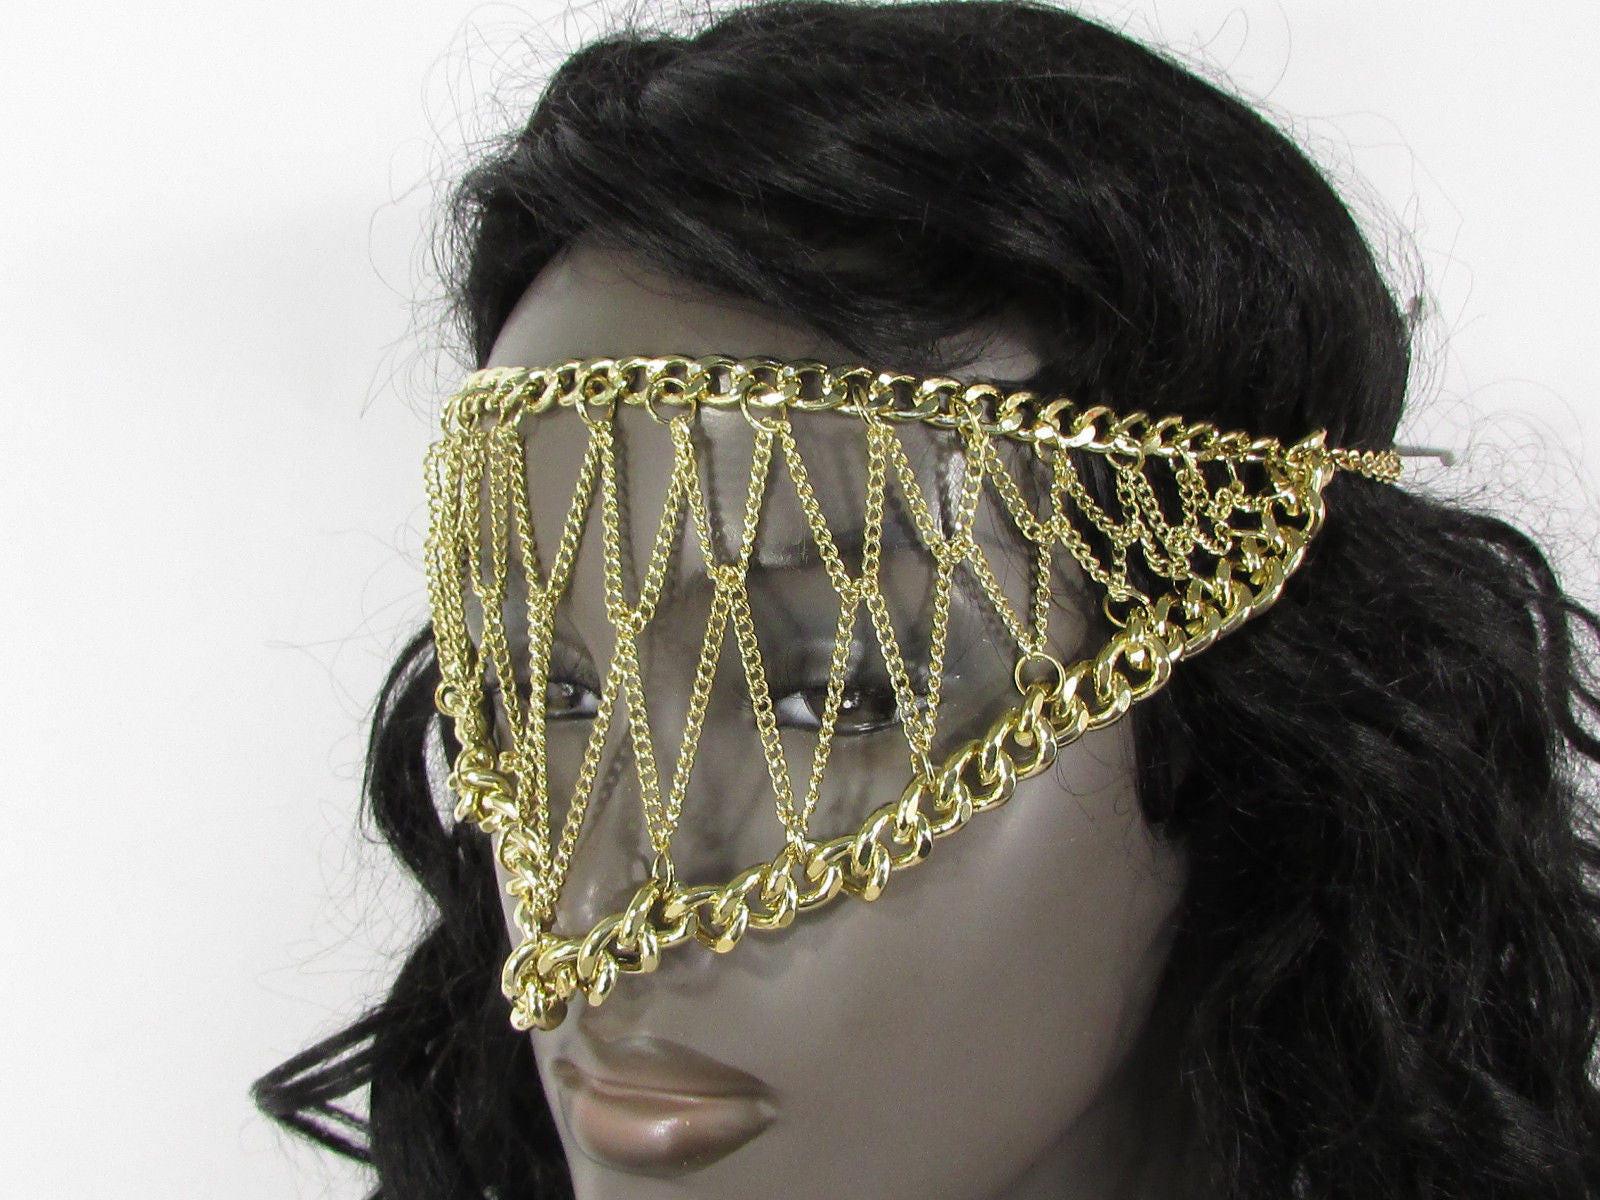 Gold Metal Head Chain Eye Cover Half Face Elastic Mask Thick Halloween ...